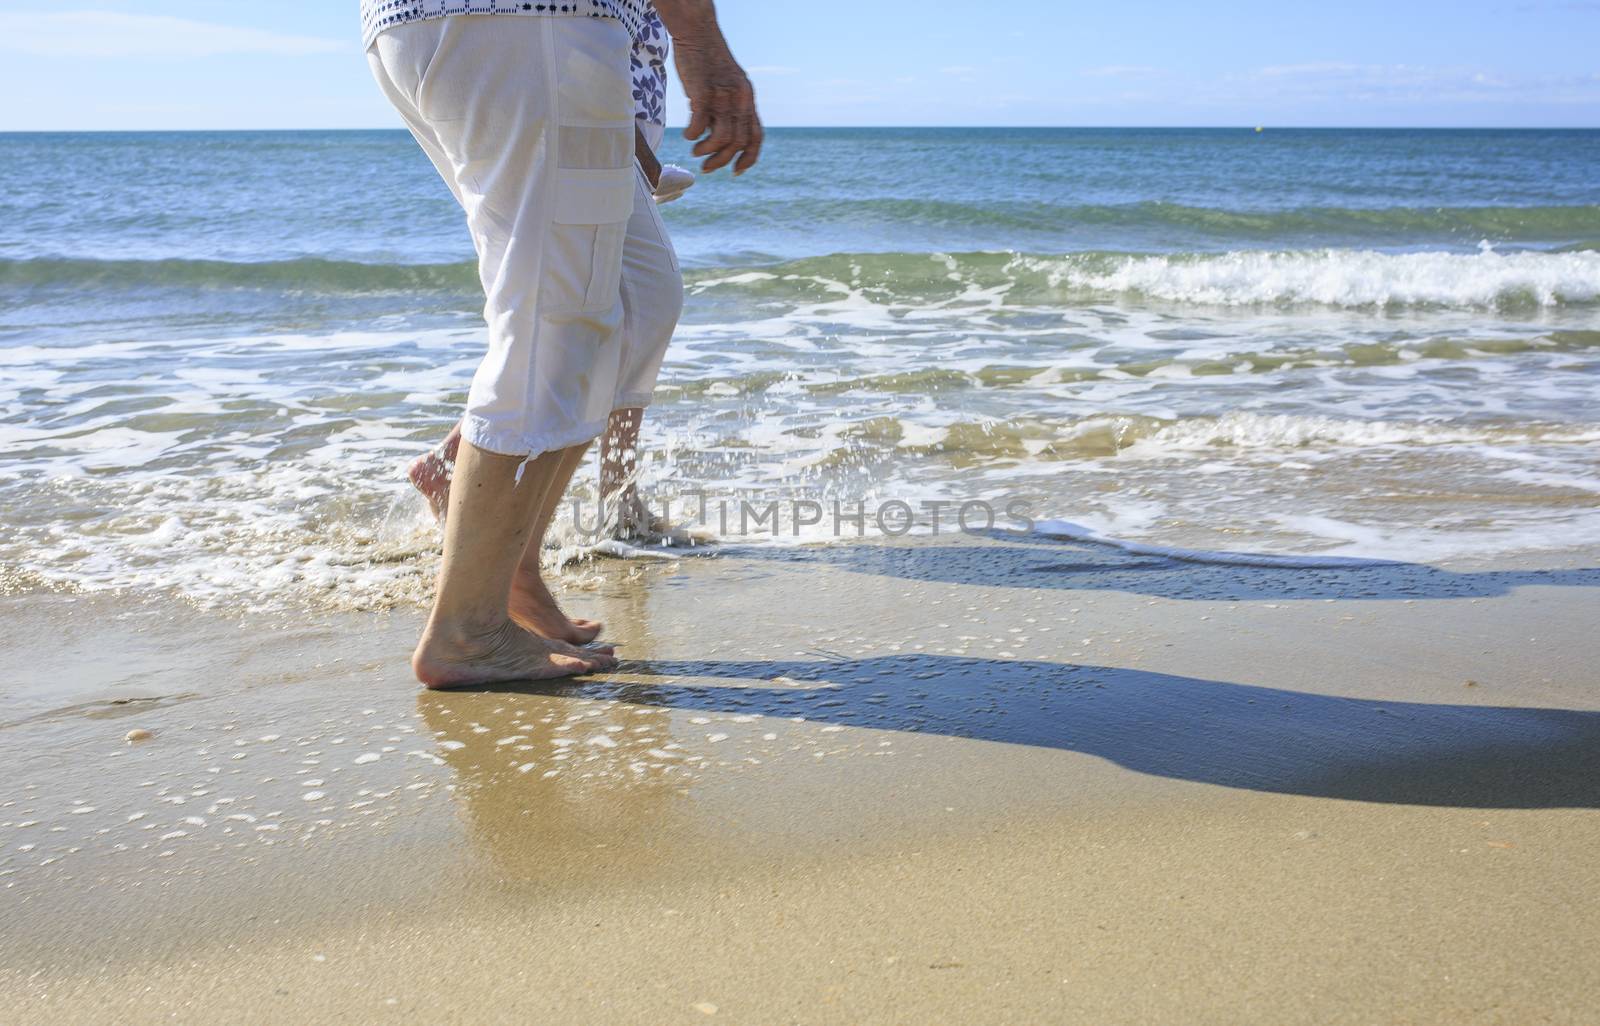 Old people taking a walk on the beach